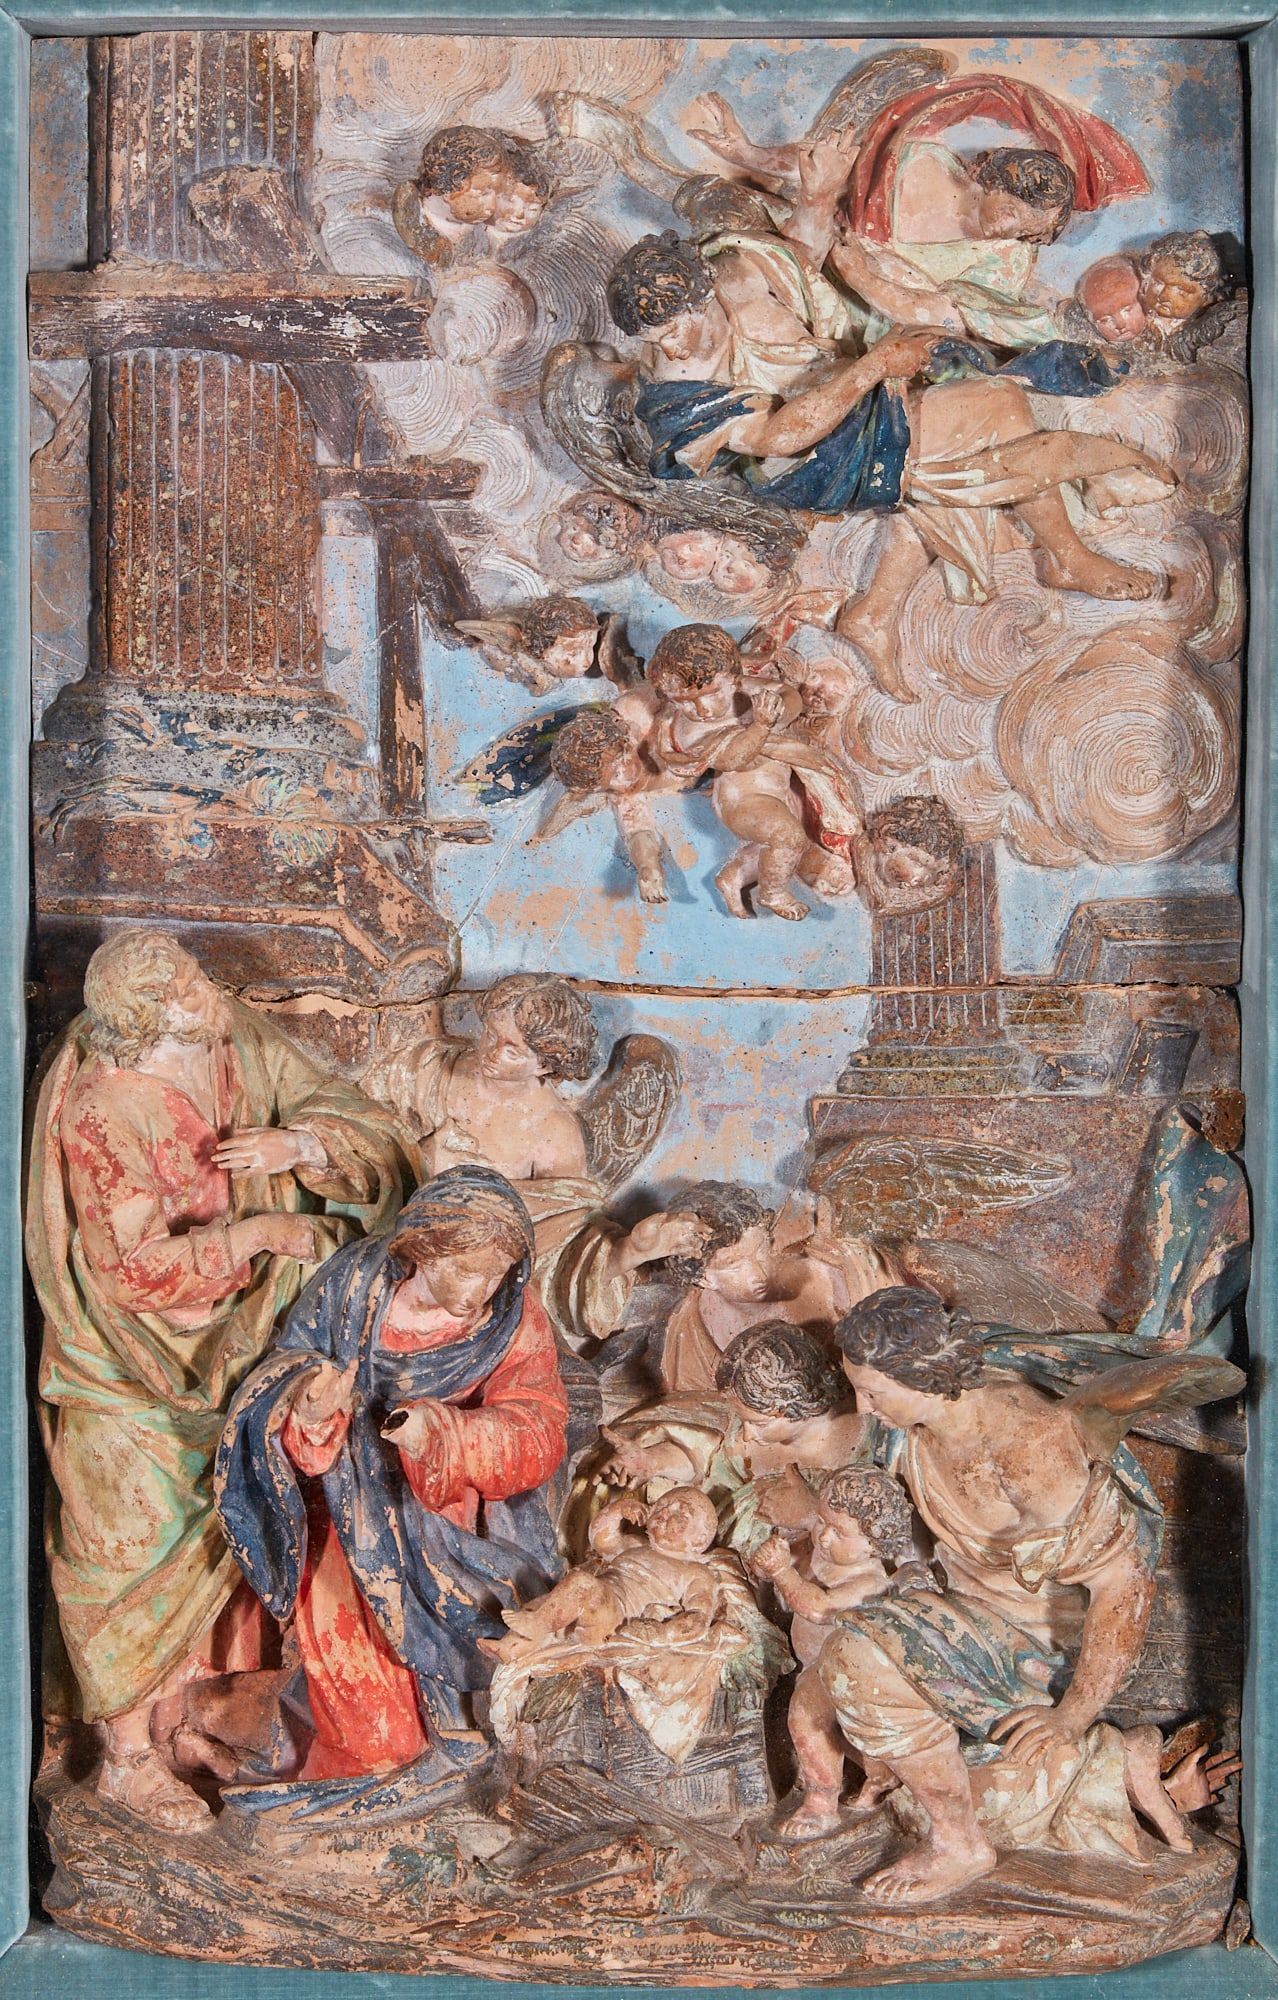 AN ITALIAN TERRACOTTA RELIEF OF THE